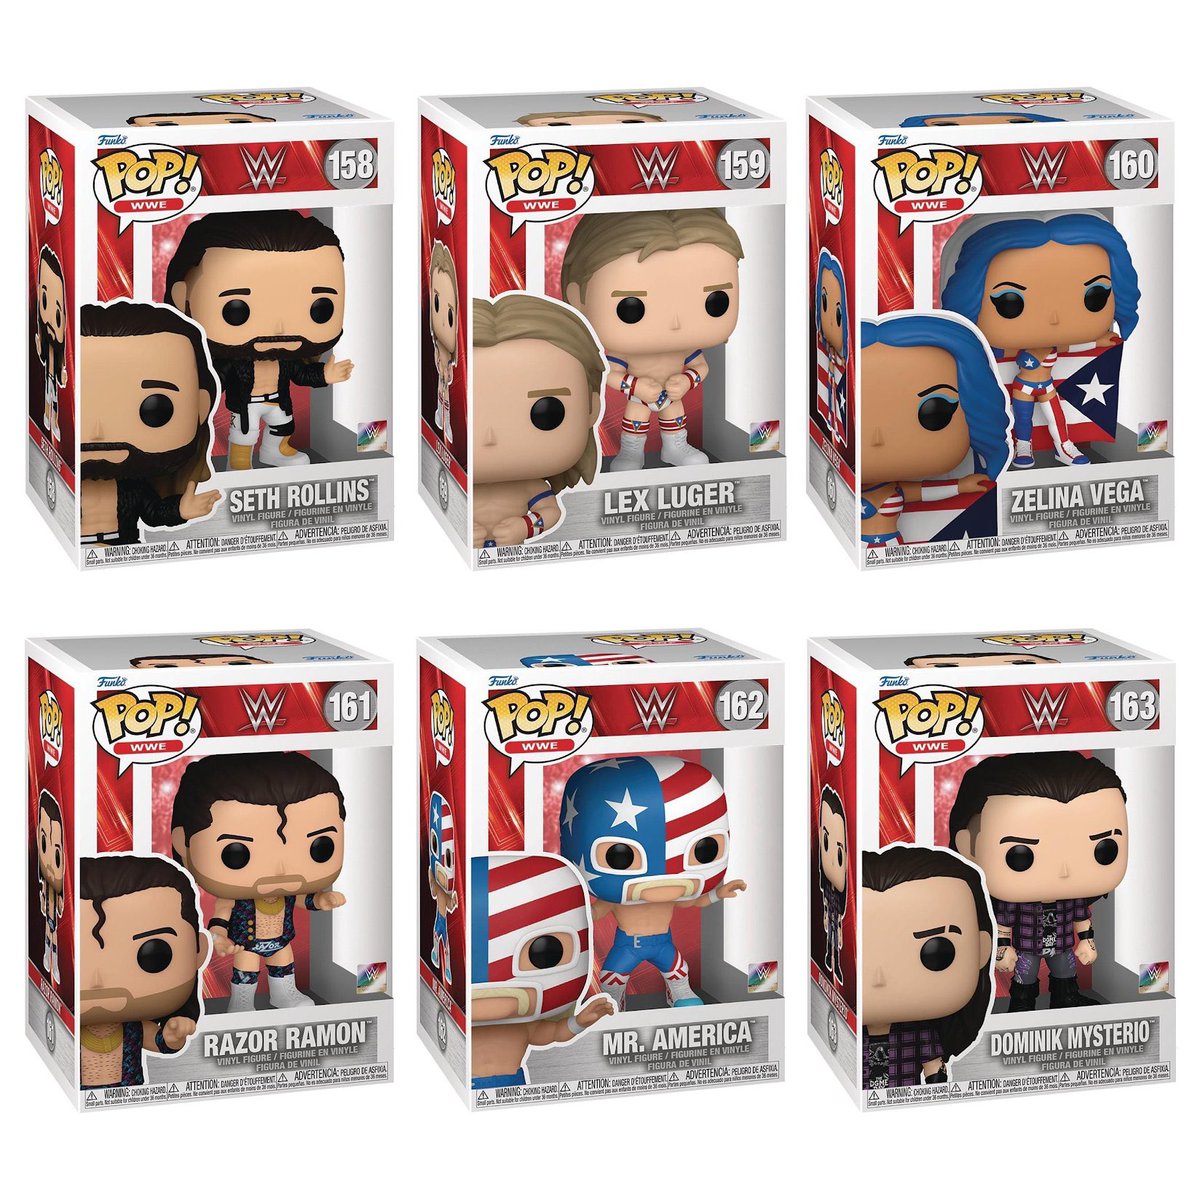 Preorder Now: Funko Pop! WWE 📦 Amazon: amzn.to/3QJaMuA 🌍 Ent Earth: ee.toys/102NWQ * No Charge Until it Ships #Ad #Funko #FunkoPop #FunkoPops #FunkoPopVinyl #Pop #PopVinyl #FunkoCollector #Collectible #Collectibles #Toy #Toys #FunkoFinderz